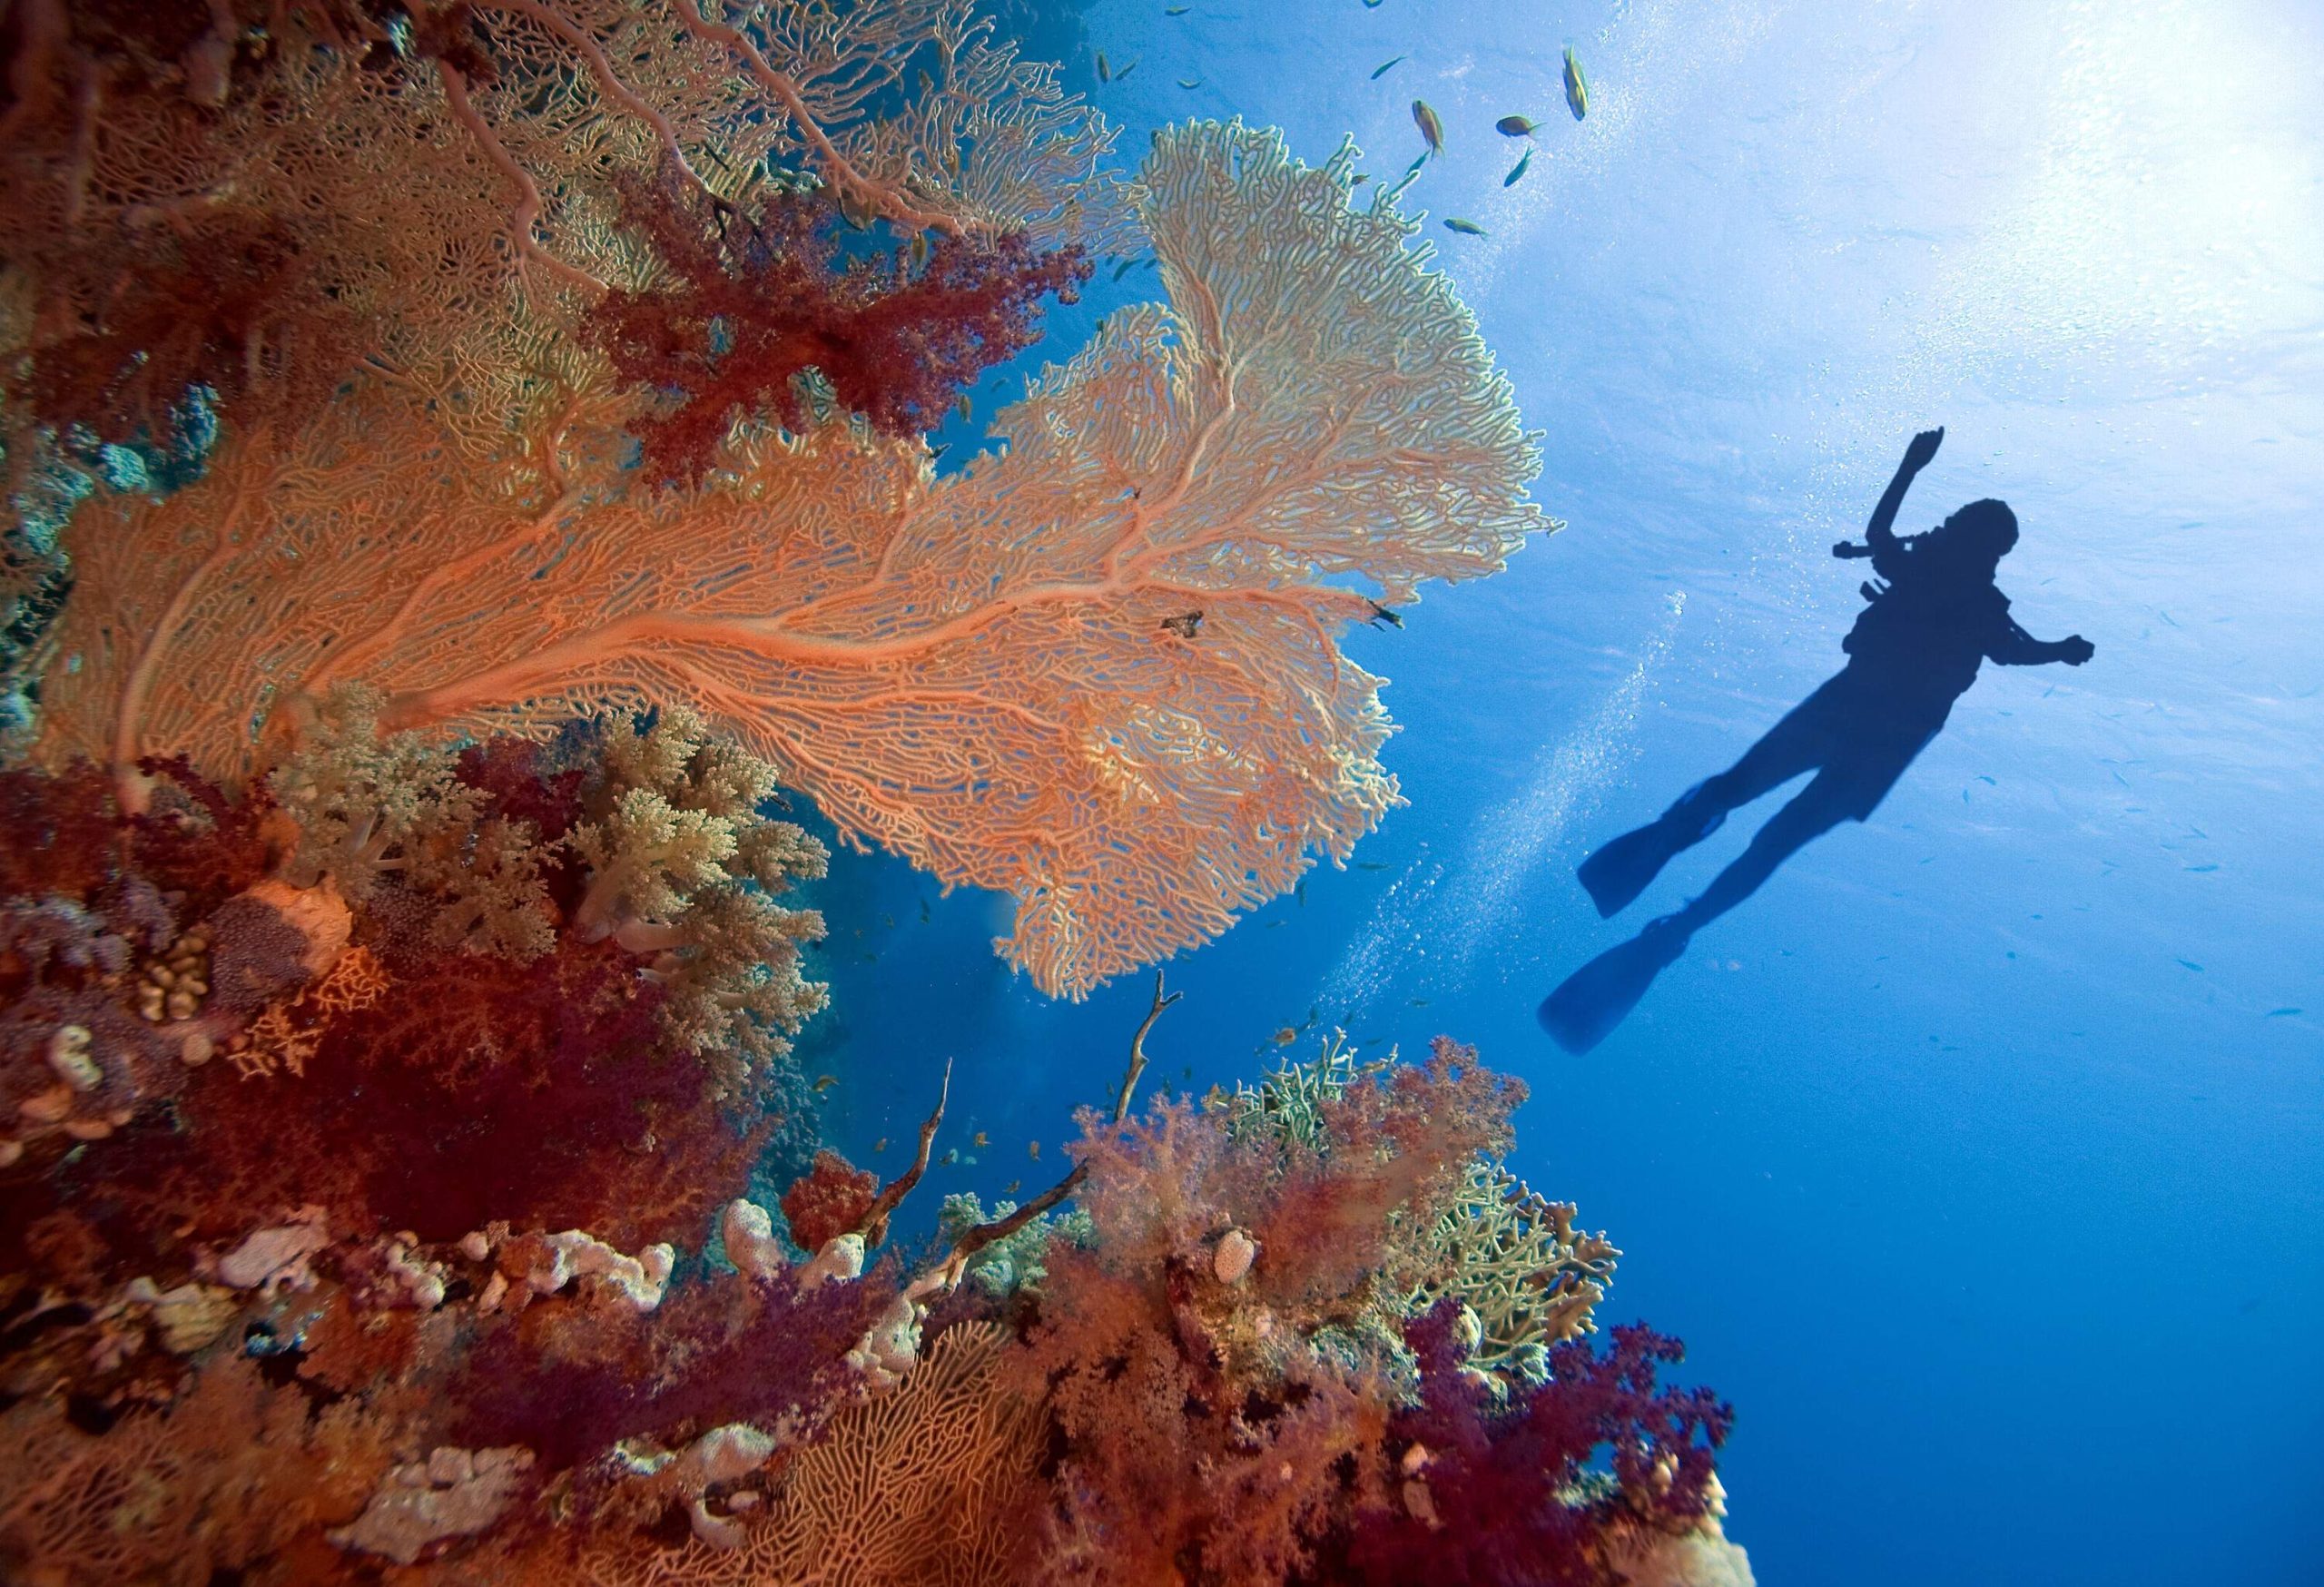 A diver swims with the fish under the deep blue sea with colourful corals.